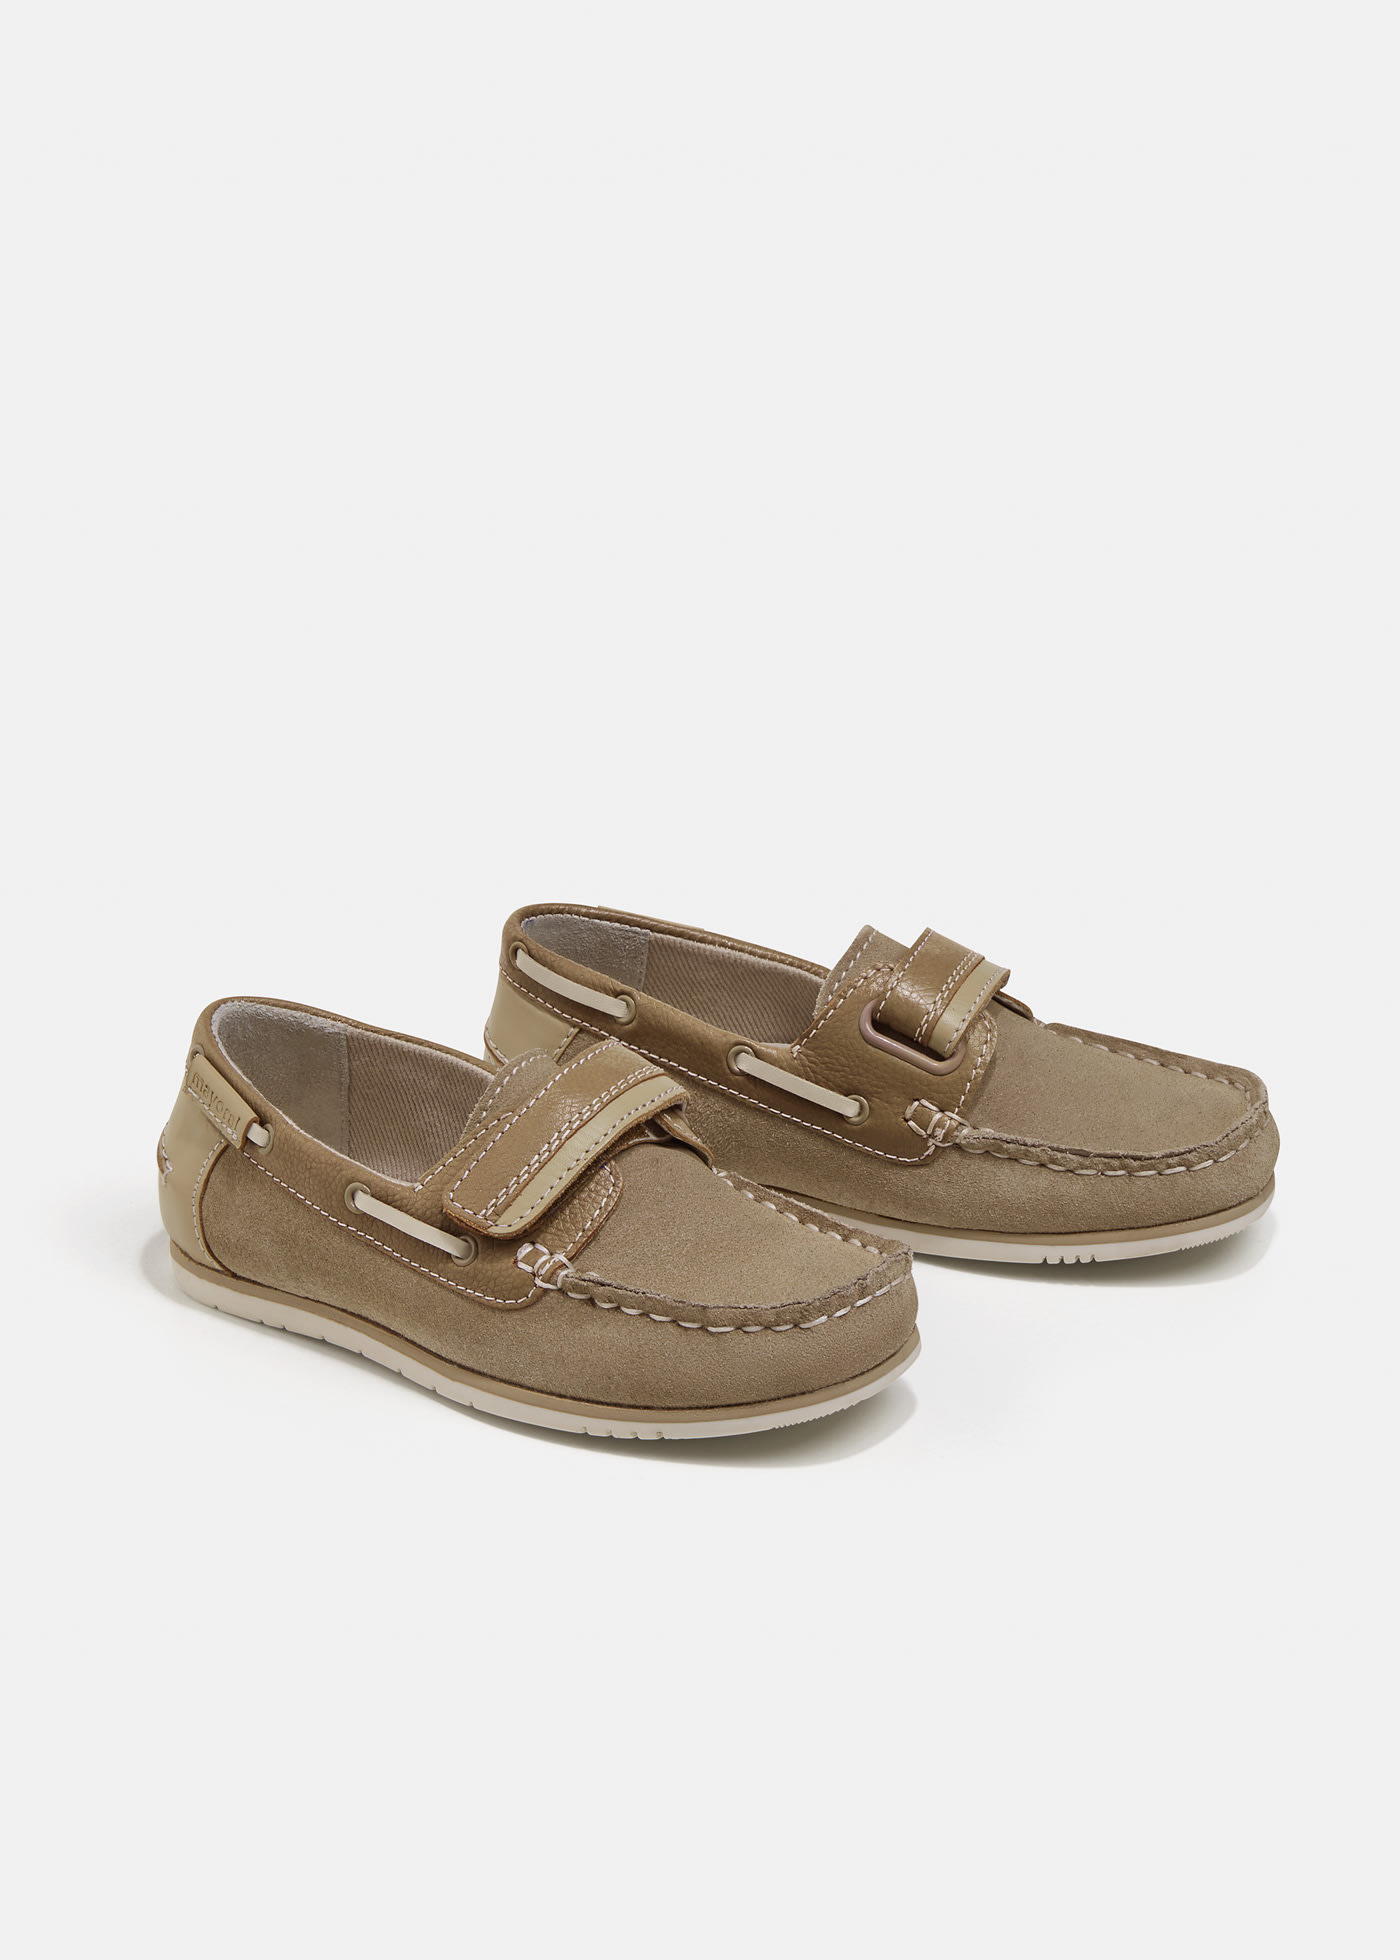 Boat shoes with lace detail boy